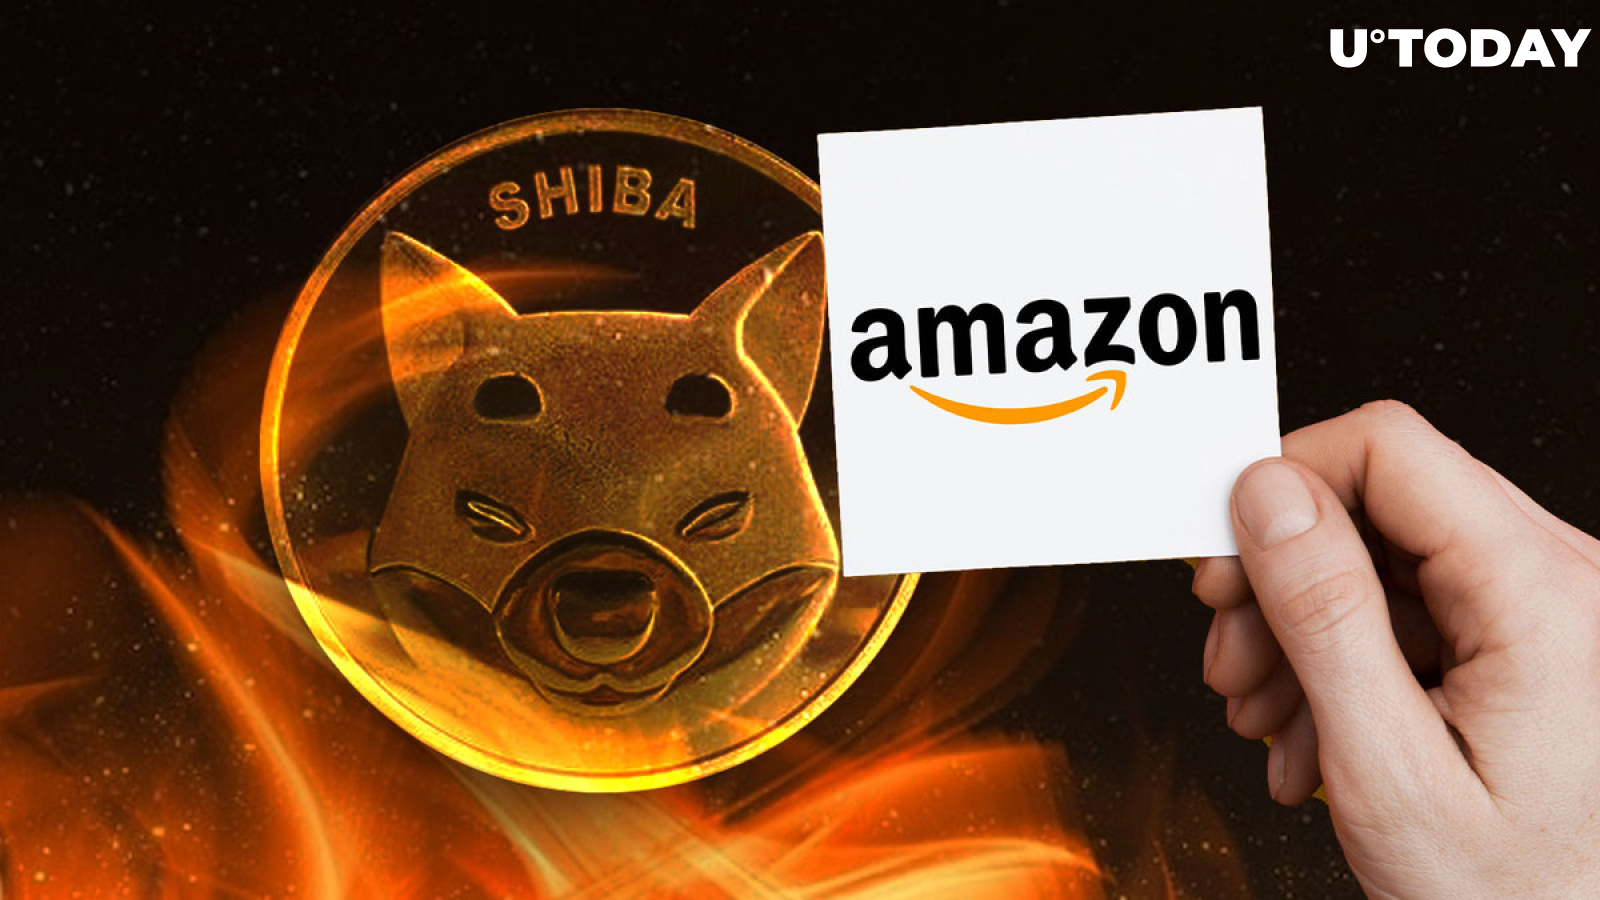 Amazon to Help Burn 140 Million SHIB, Here’s How Much Will Be Burned via E-Commerce Giant